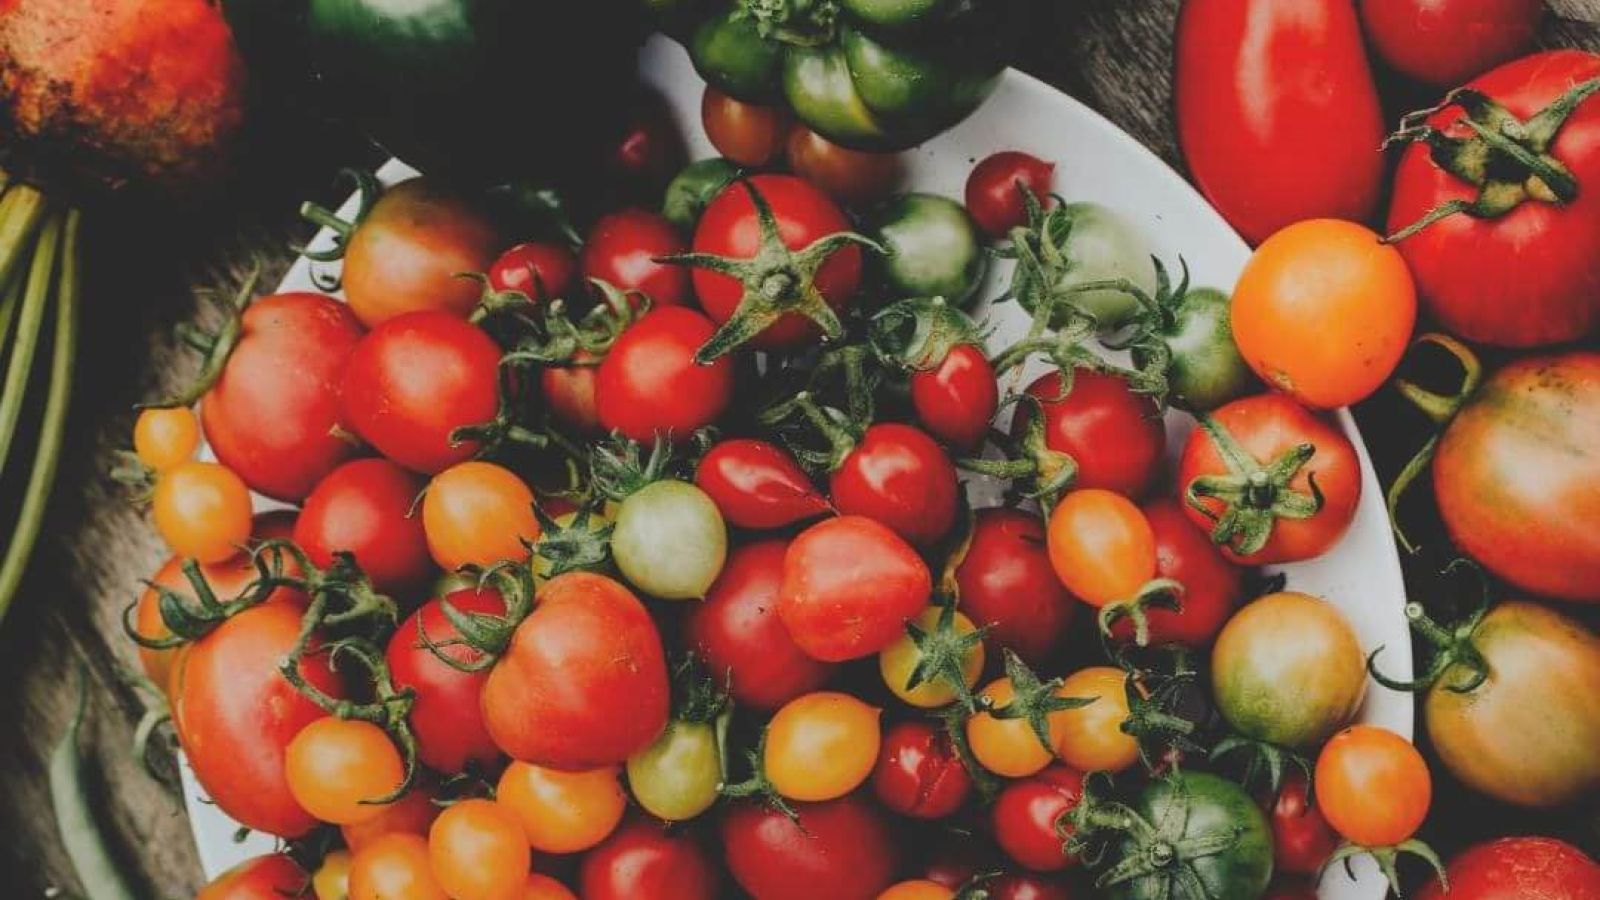 Increase your sperm quality with fertility foods such as tomatoes